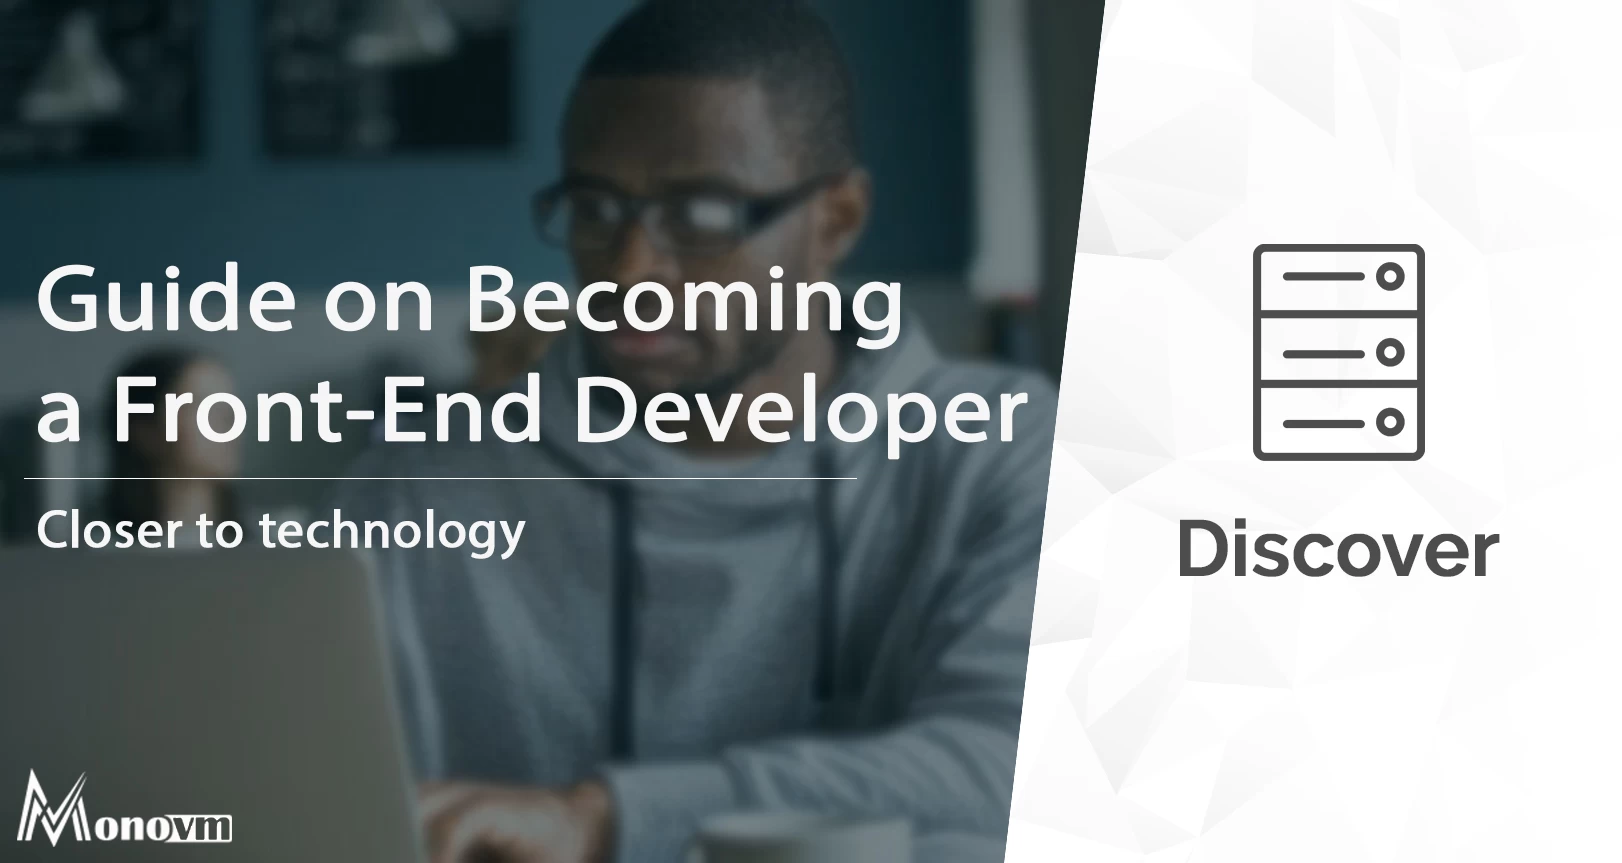 A Step-by-Step Guide on How to Become a Front-End Developer in 2023